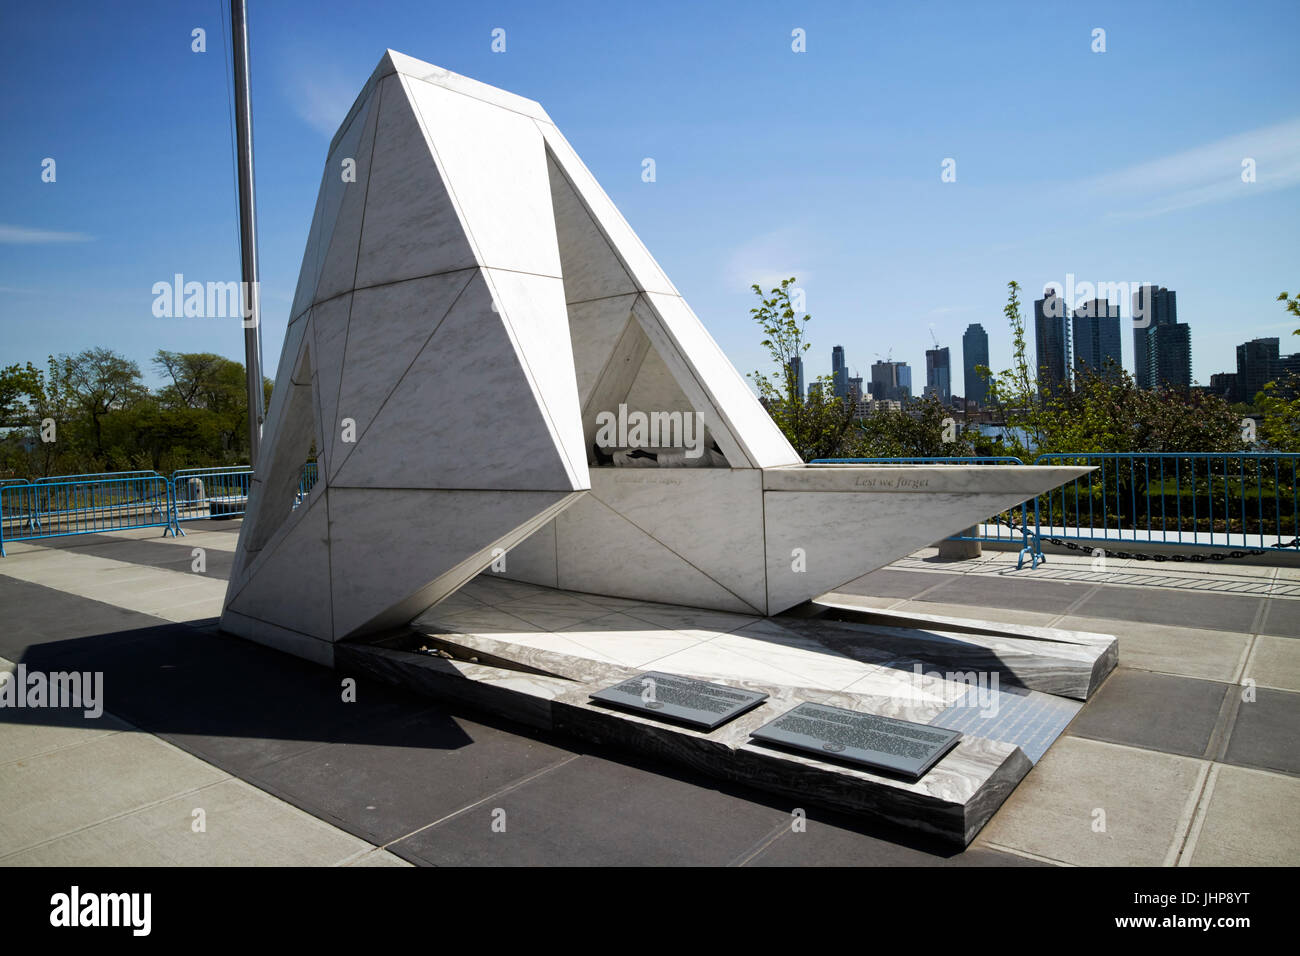 UN permanent memorial to the victims of slavery and transatlantic slave trade united nations New York City USA Stock Photo